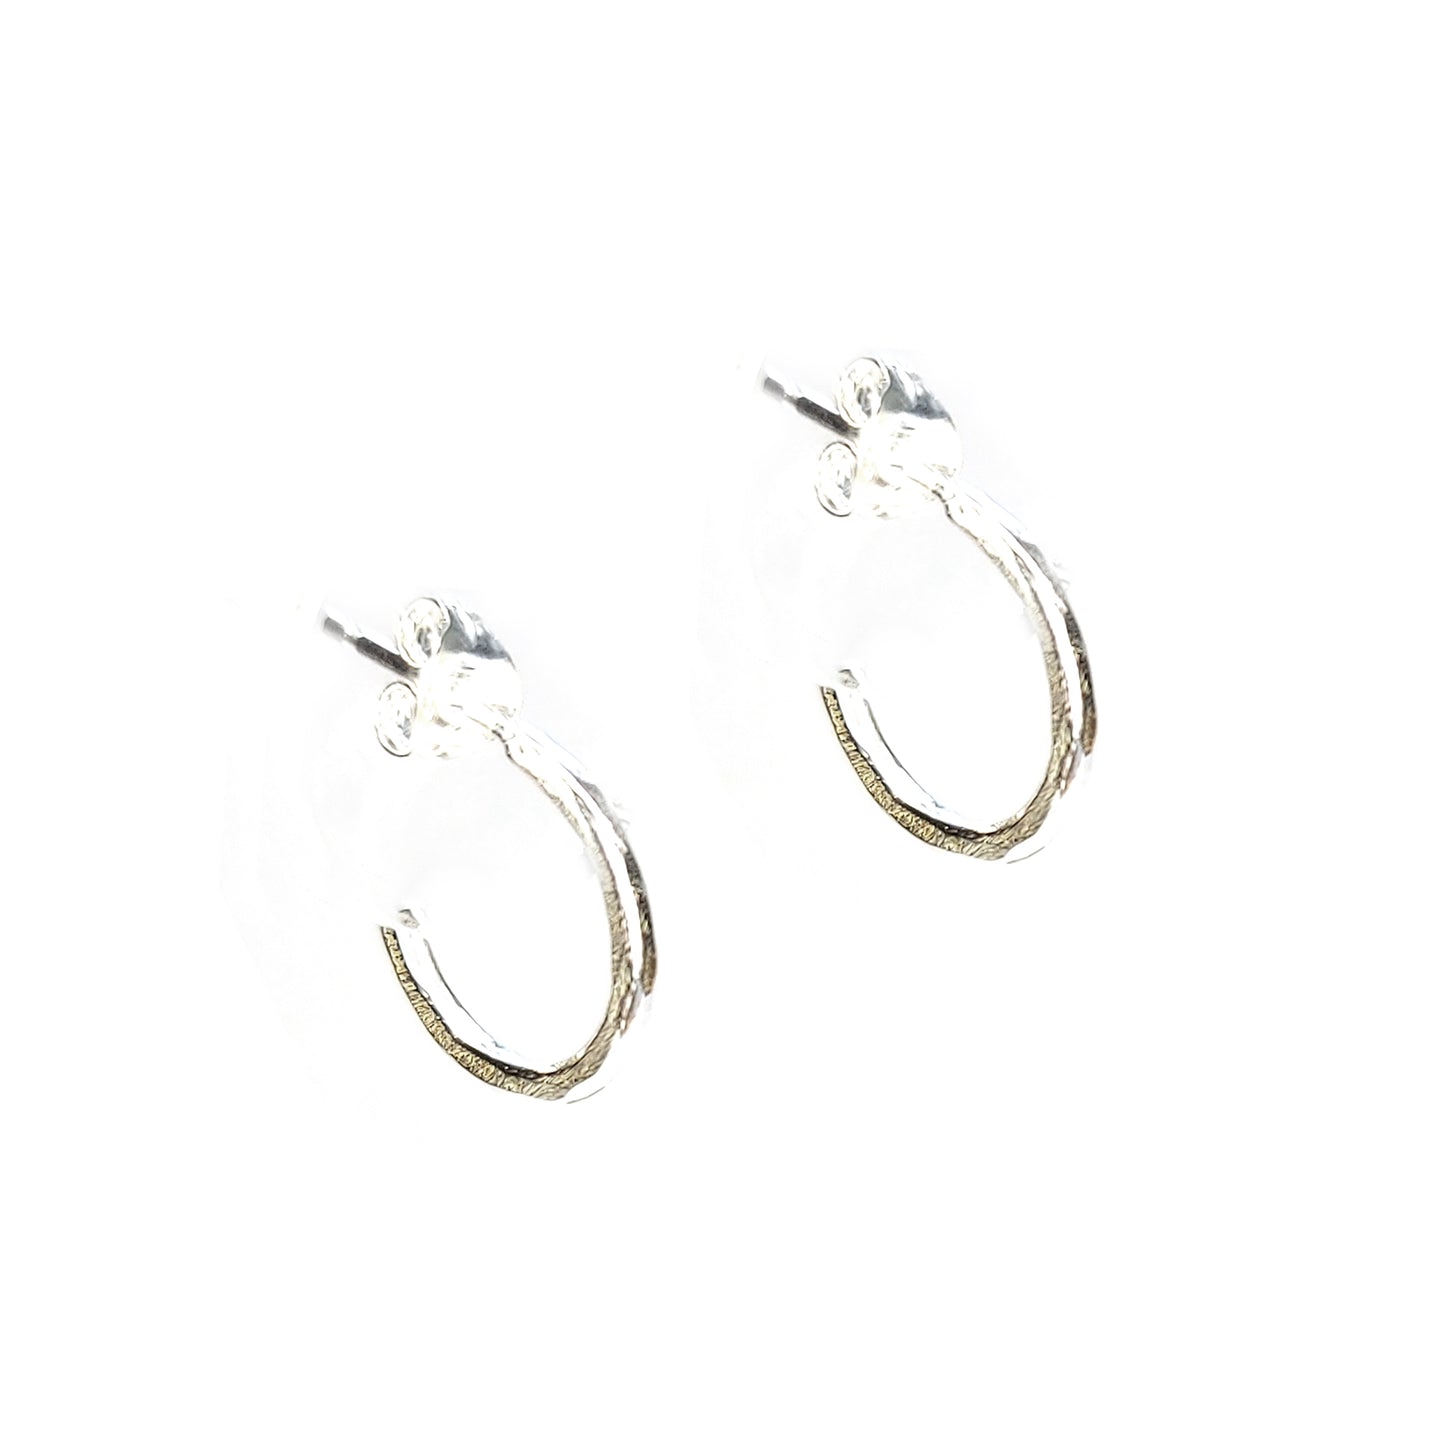 Silver thin hammered hoop earrings - small.